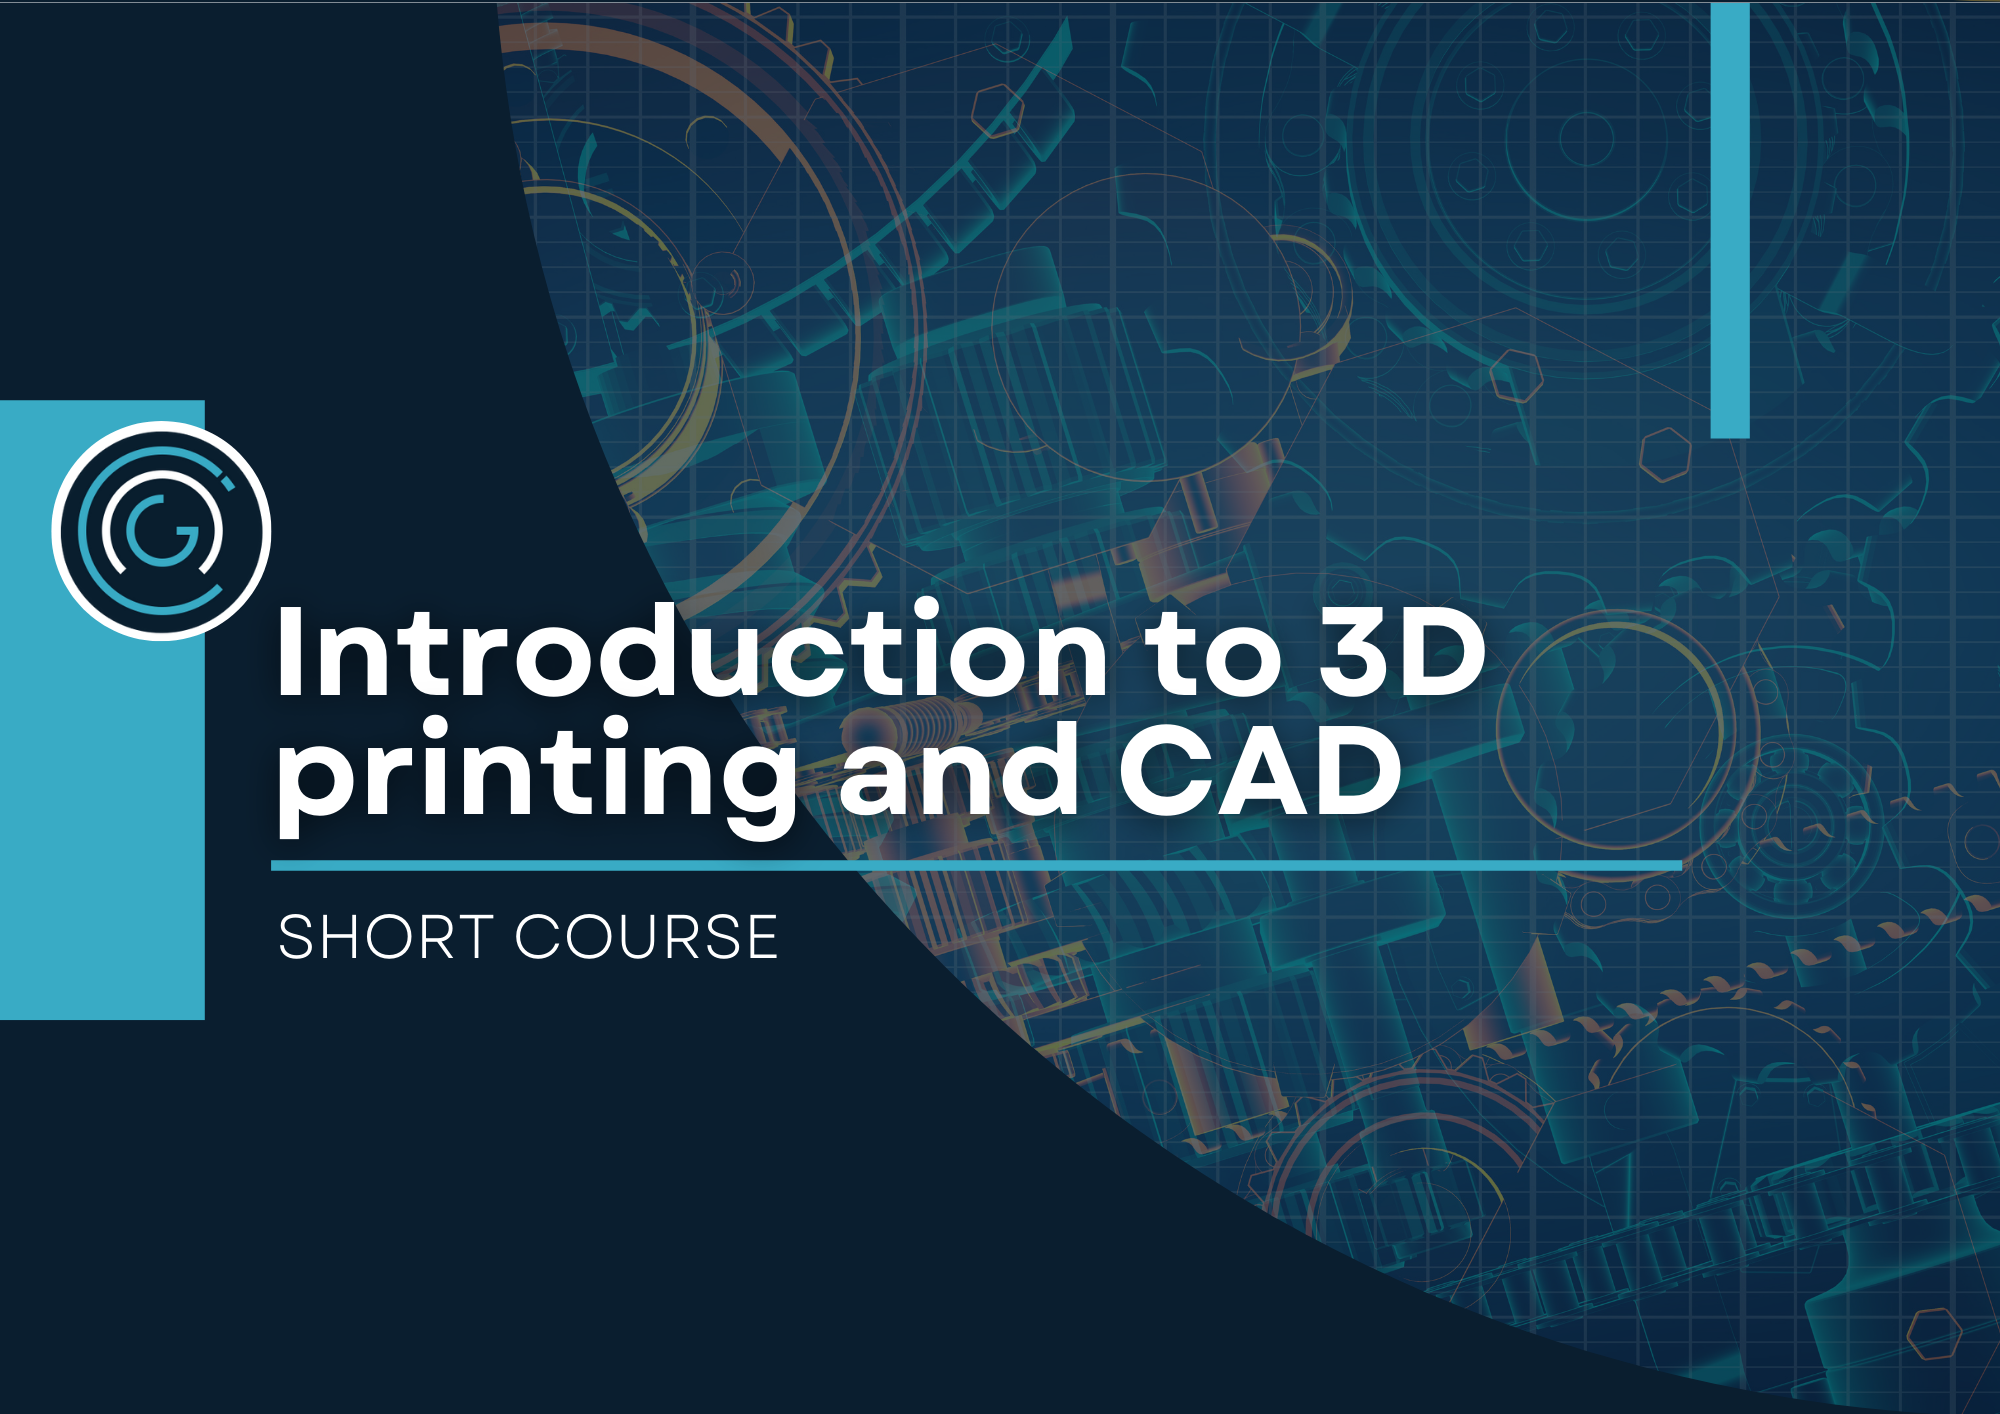 Introduction to 3D Printing and CAD Grade 7-9